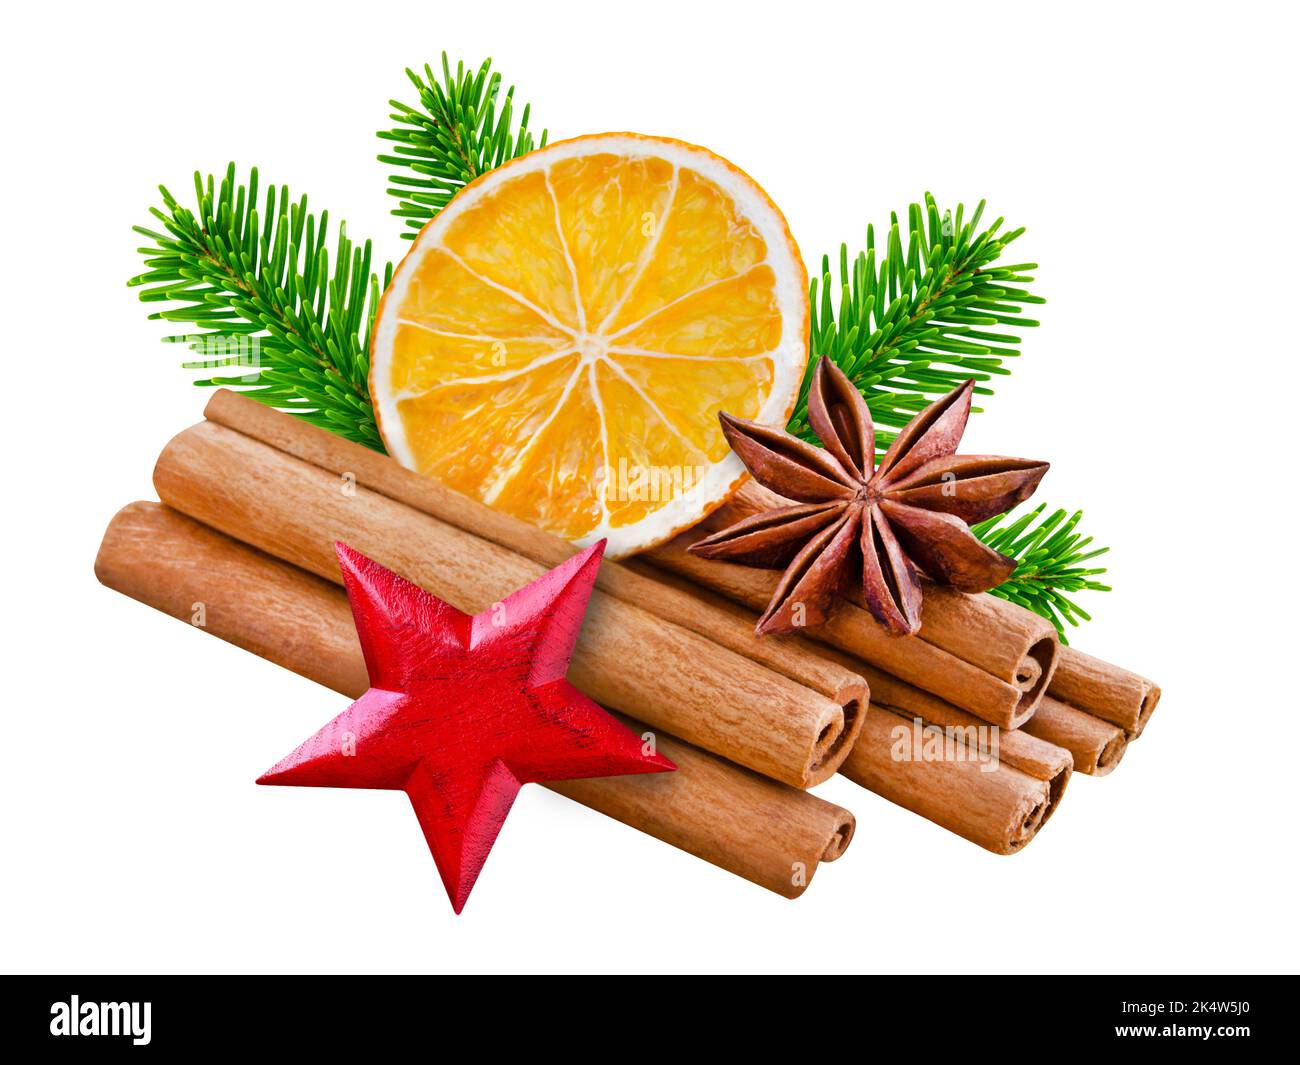 Cinnamon sticks and oranges with star anise isolated on white background Stock Photo